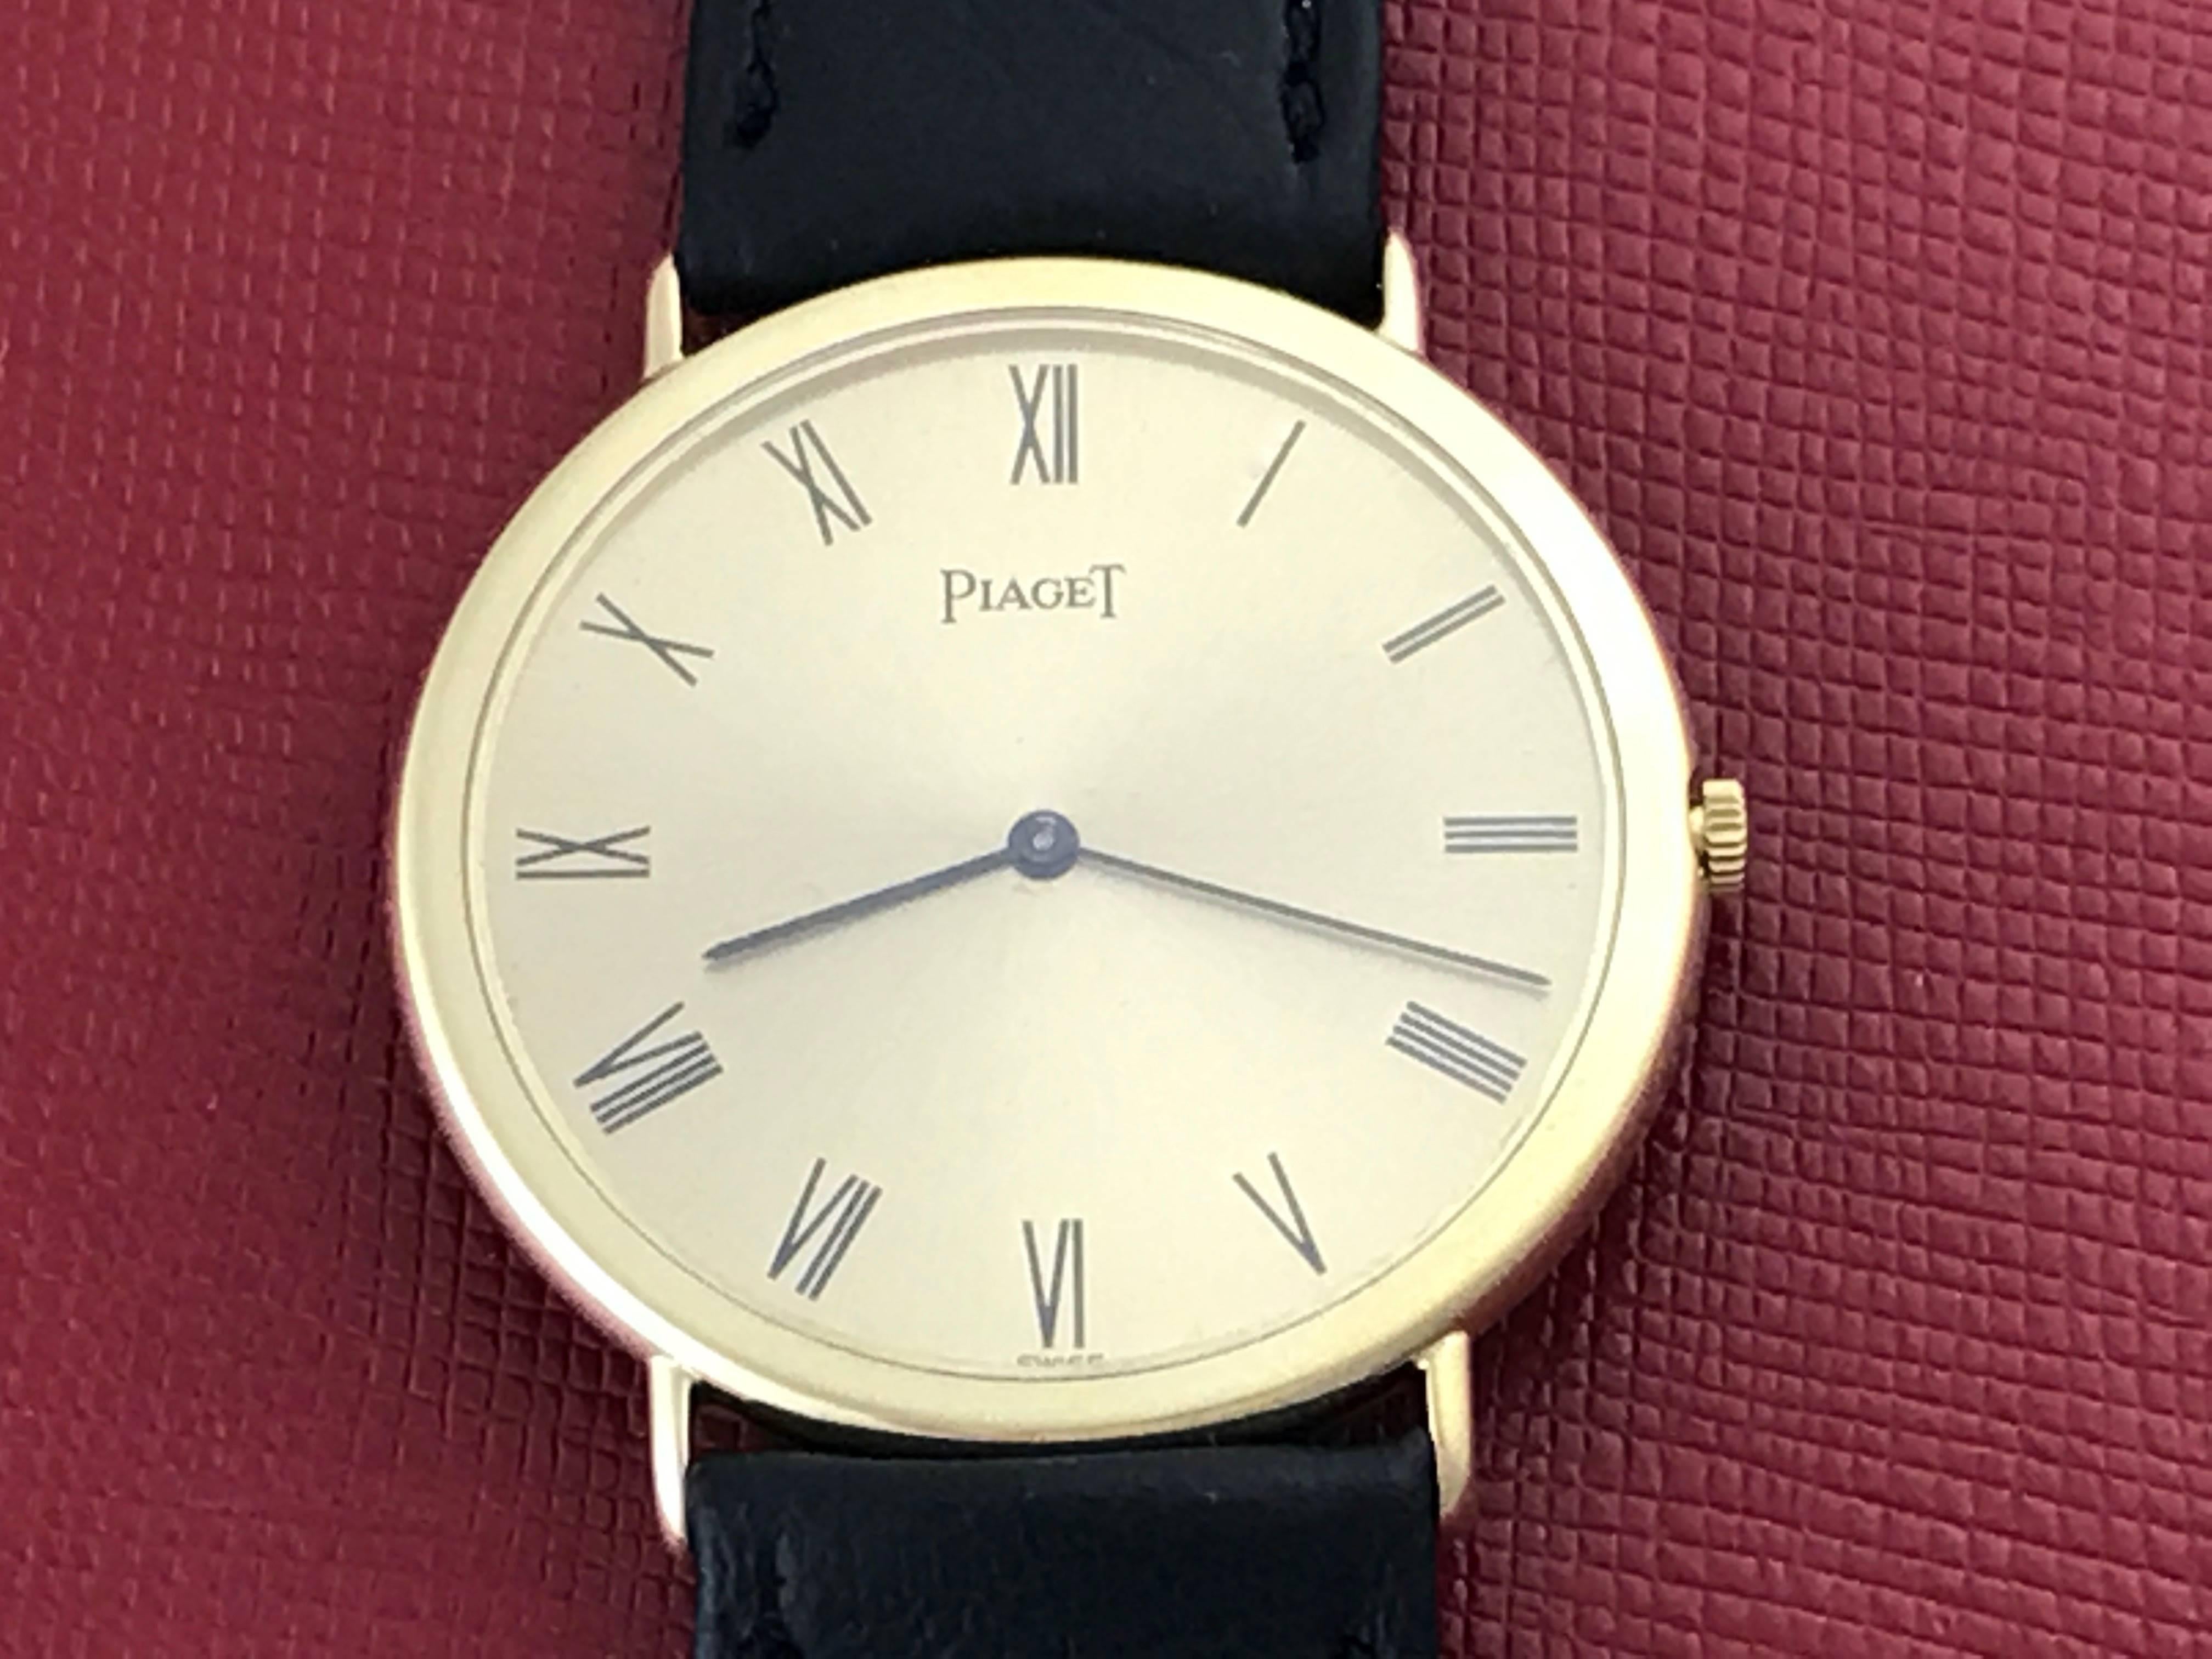 Piaget Pre Owned Mens Manual Winding wrist watch. Champagne Dial with black Roman numerals 18k Yellow Gold round style case (32mm), black strap with yellow gold filled buckle. Classic, simple, beautiful! Ready to ship! Inventory # C44390